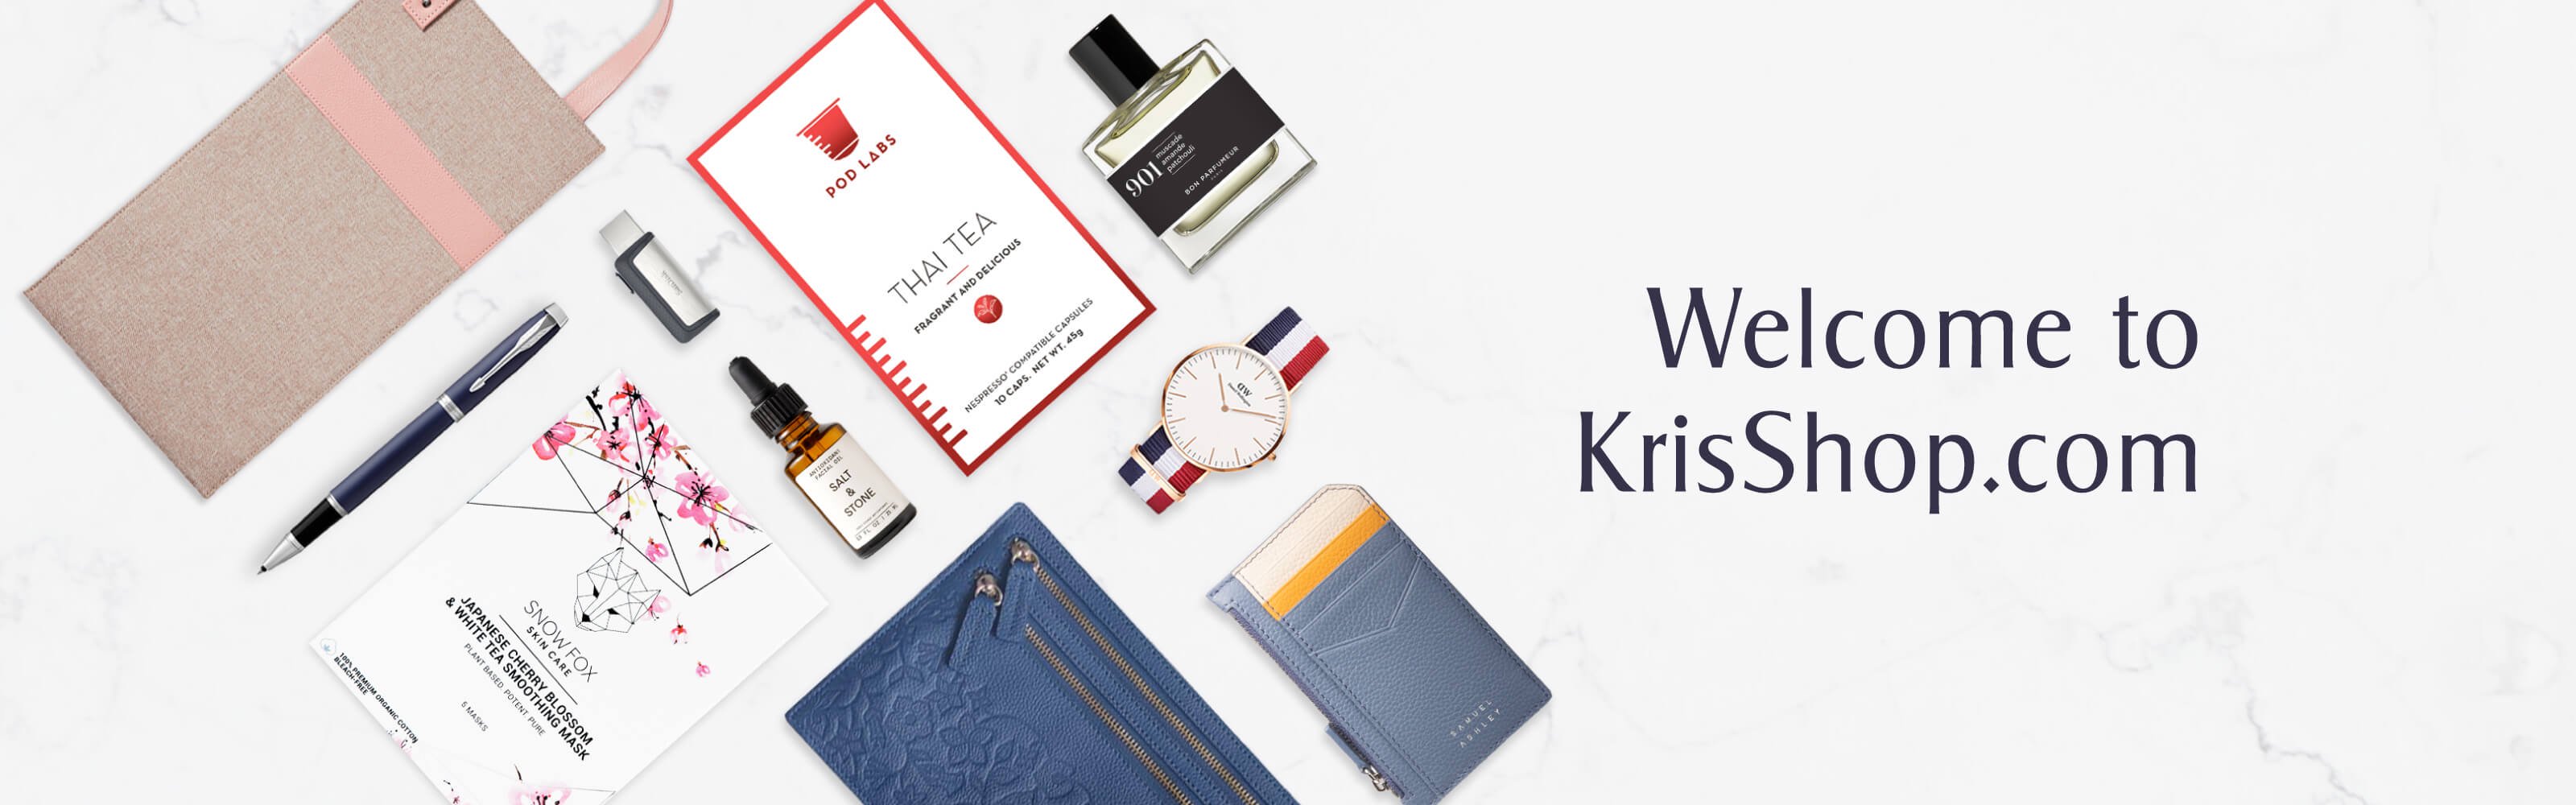 Welcome to KrisShop - Use code 8CITED at checkout